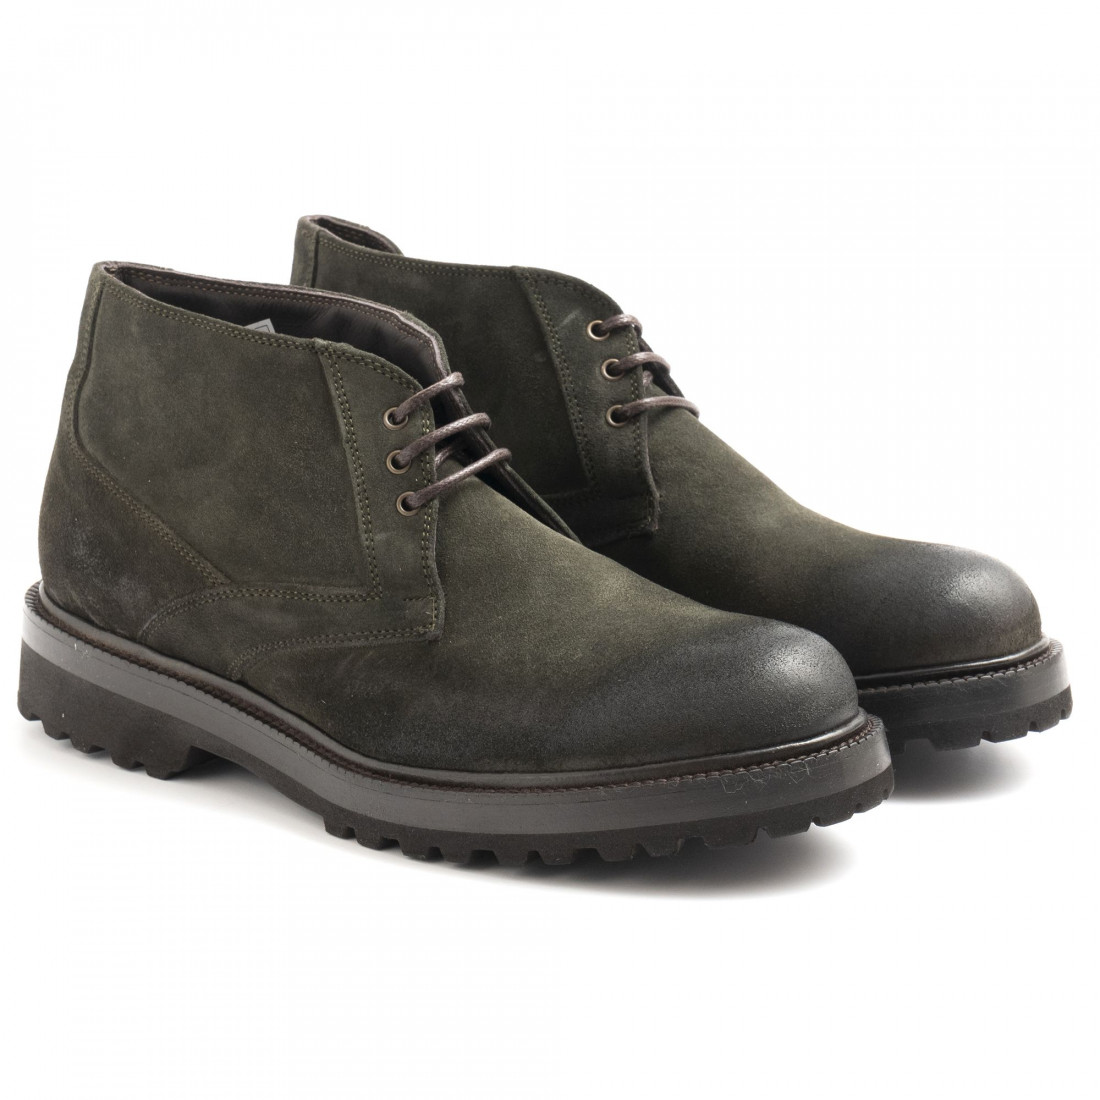 Men's Sangiorgio mid cut shoes in green suede